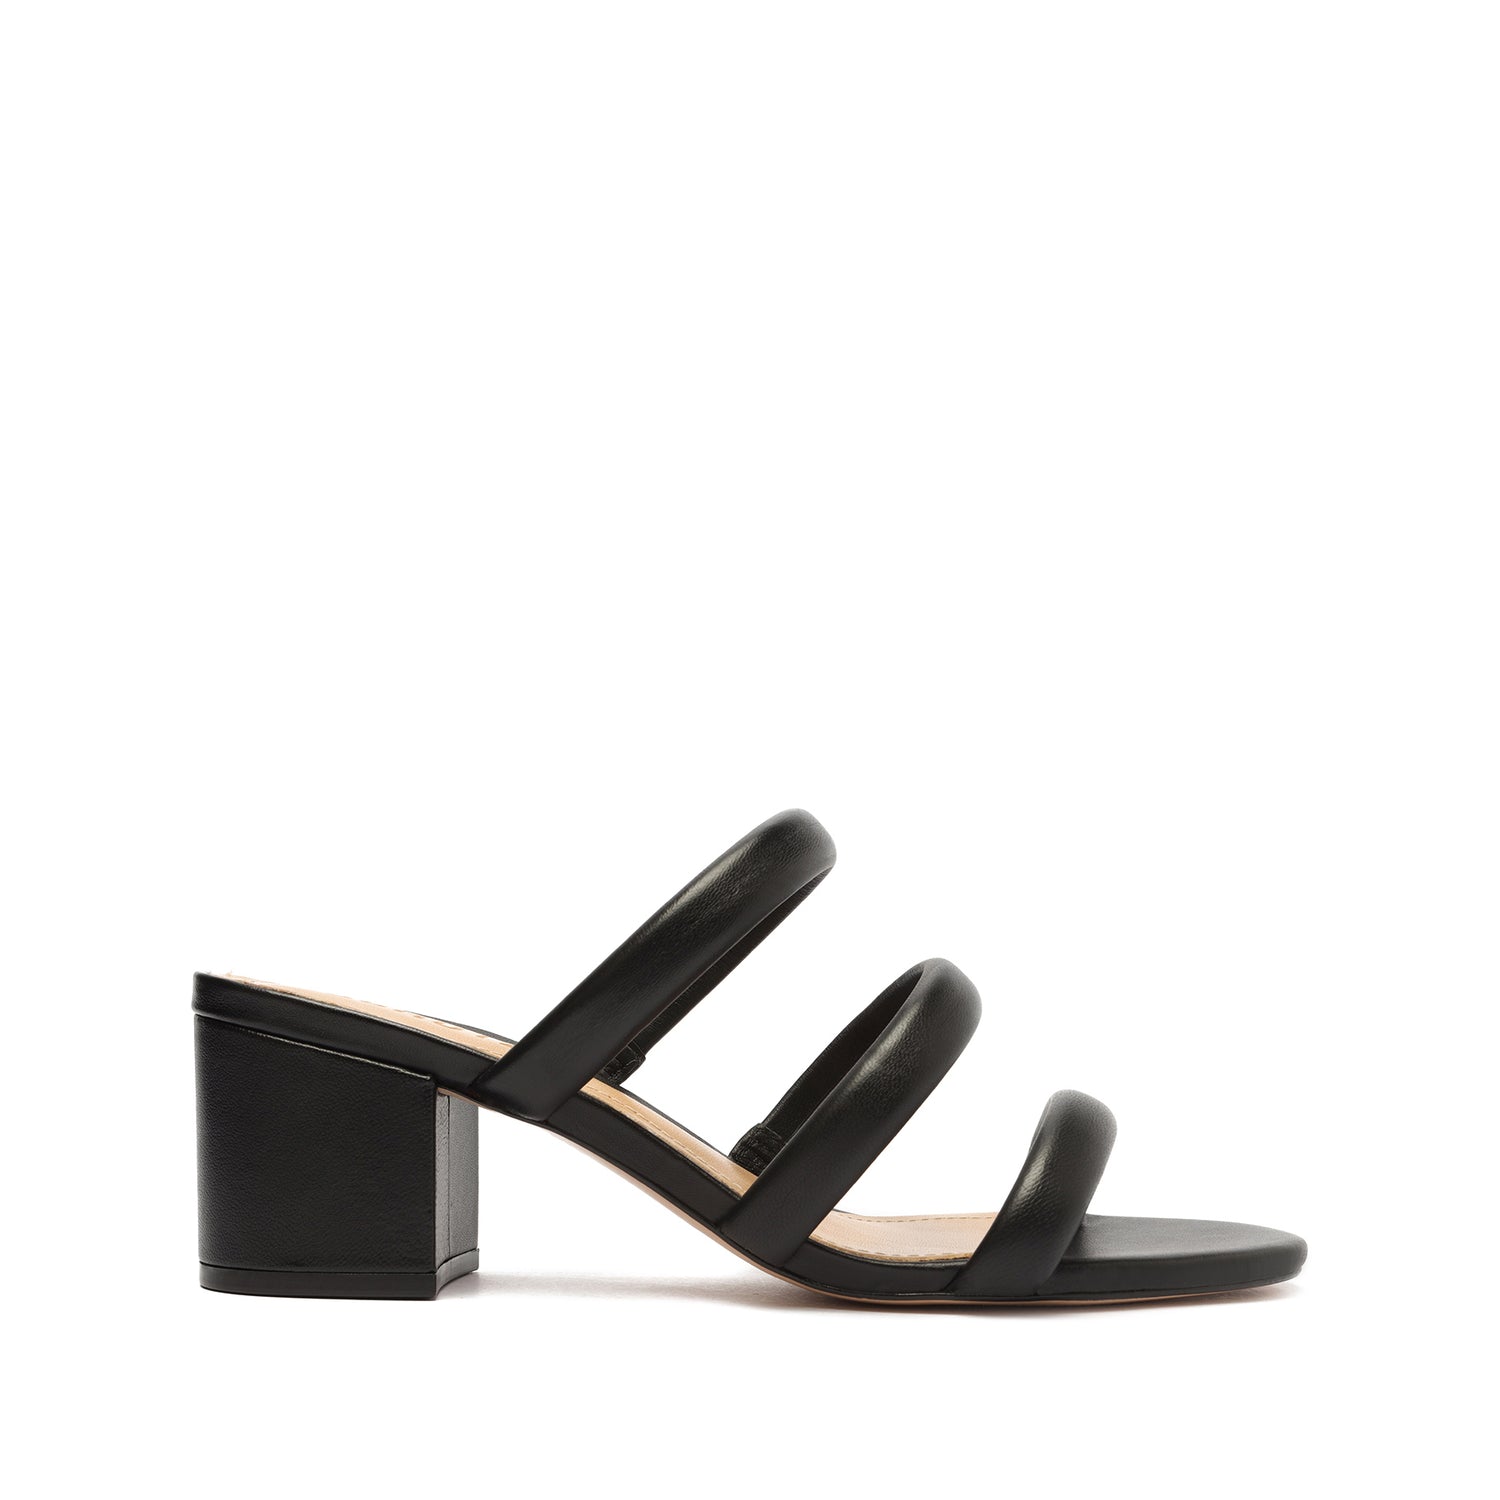 Olly Mid Block Nappa Leather Sandal Sandals OLD 5 Black Nappa Leather - Schutz Shoes